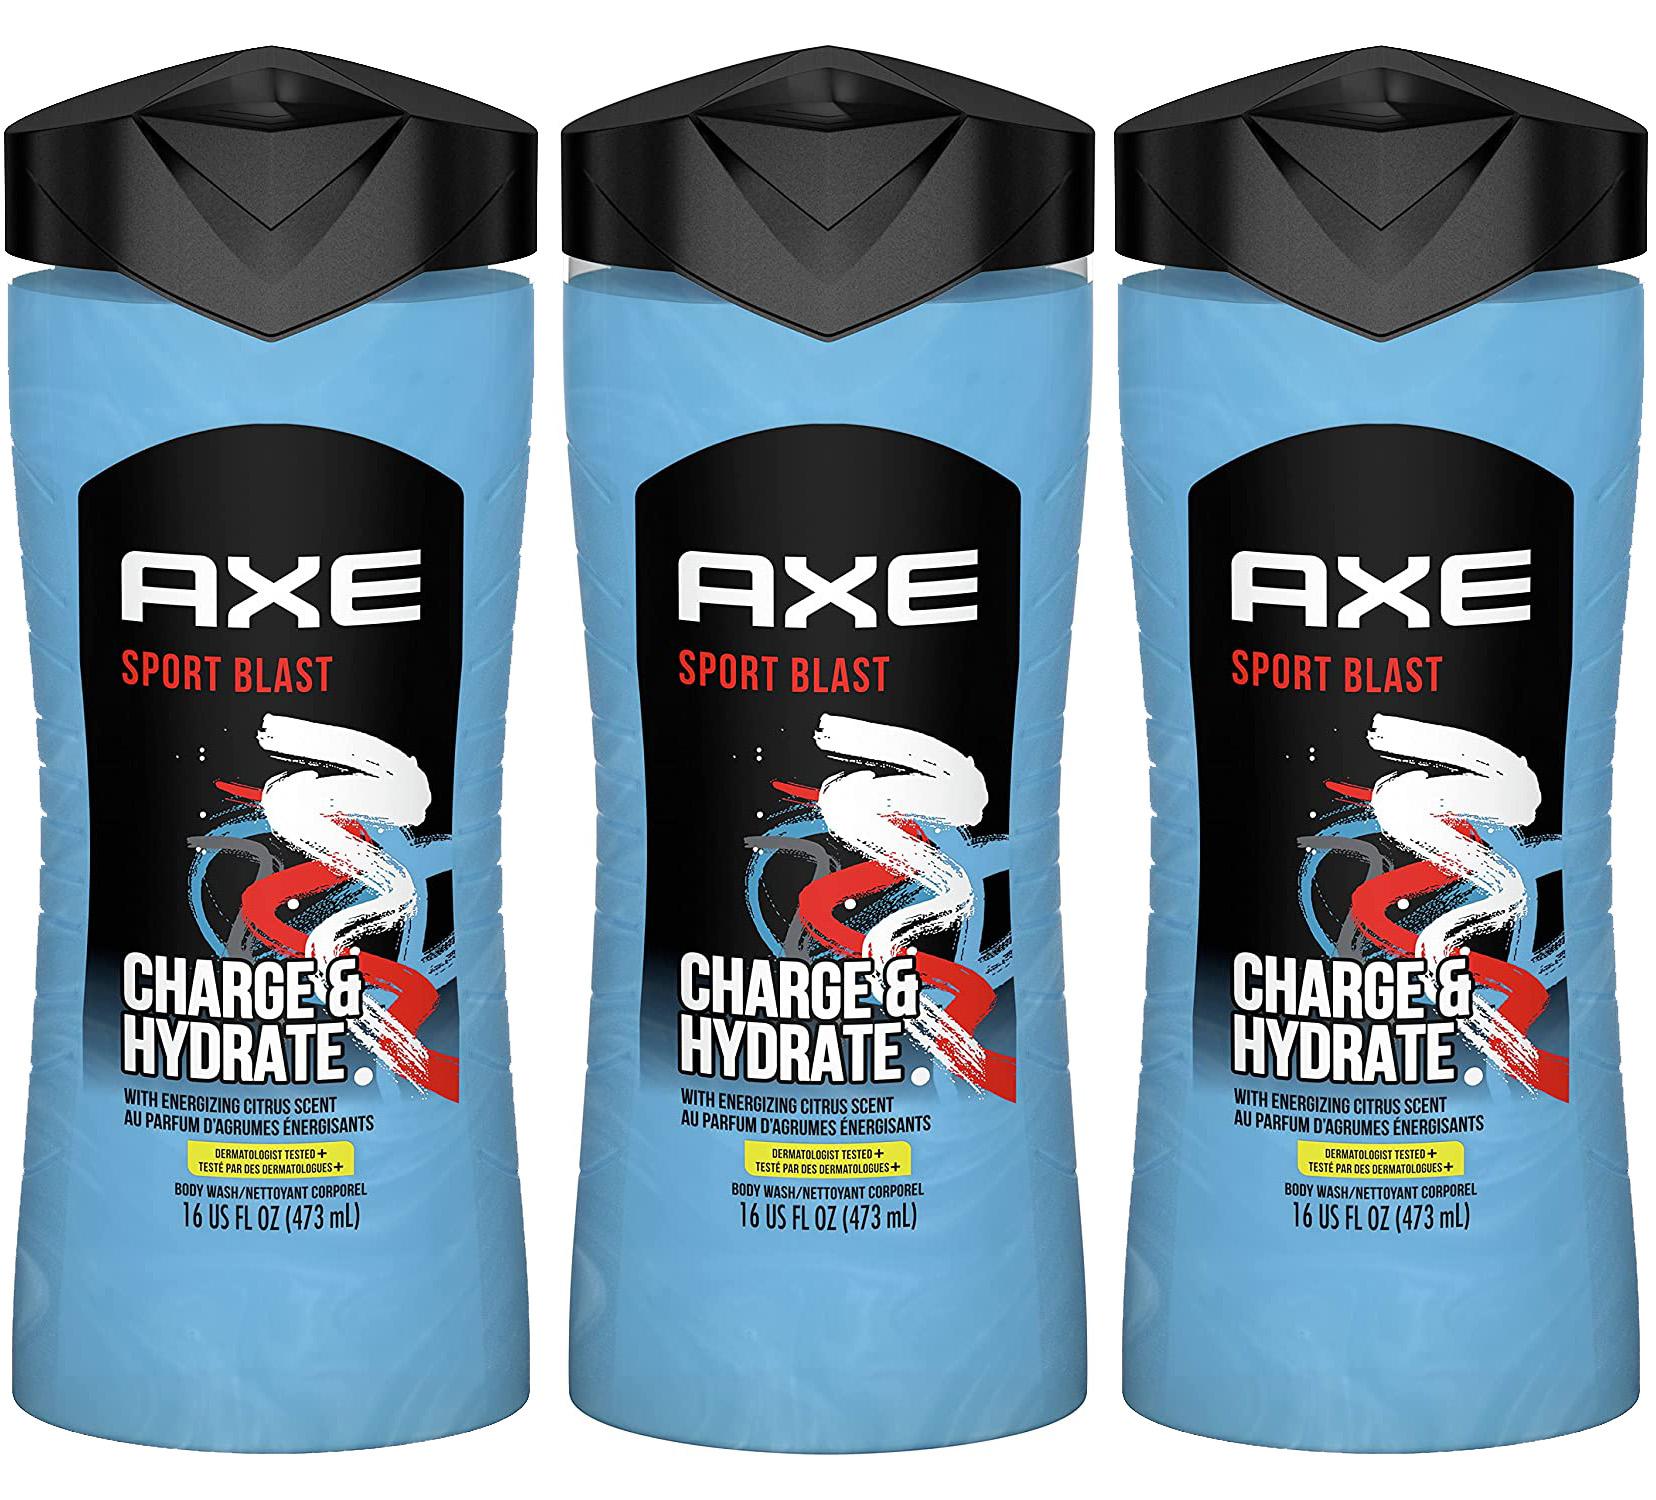 3x Axe Mens Body Wash Charge and Hydrate for $7.51 Shipped